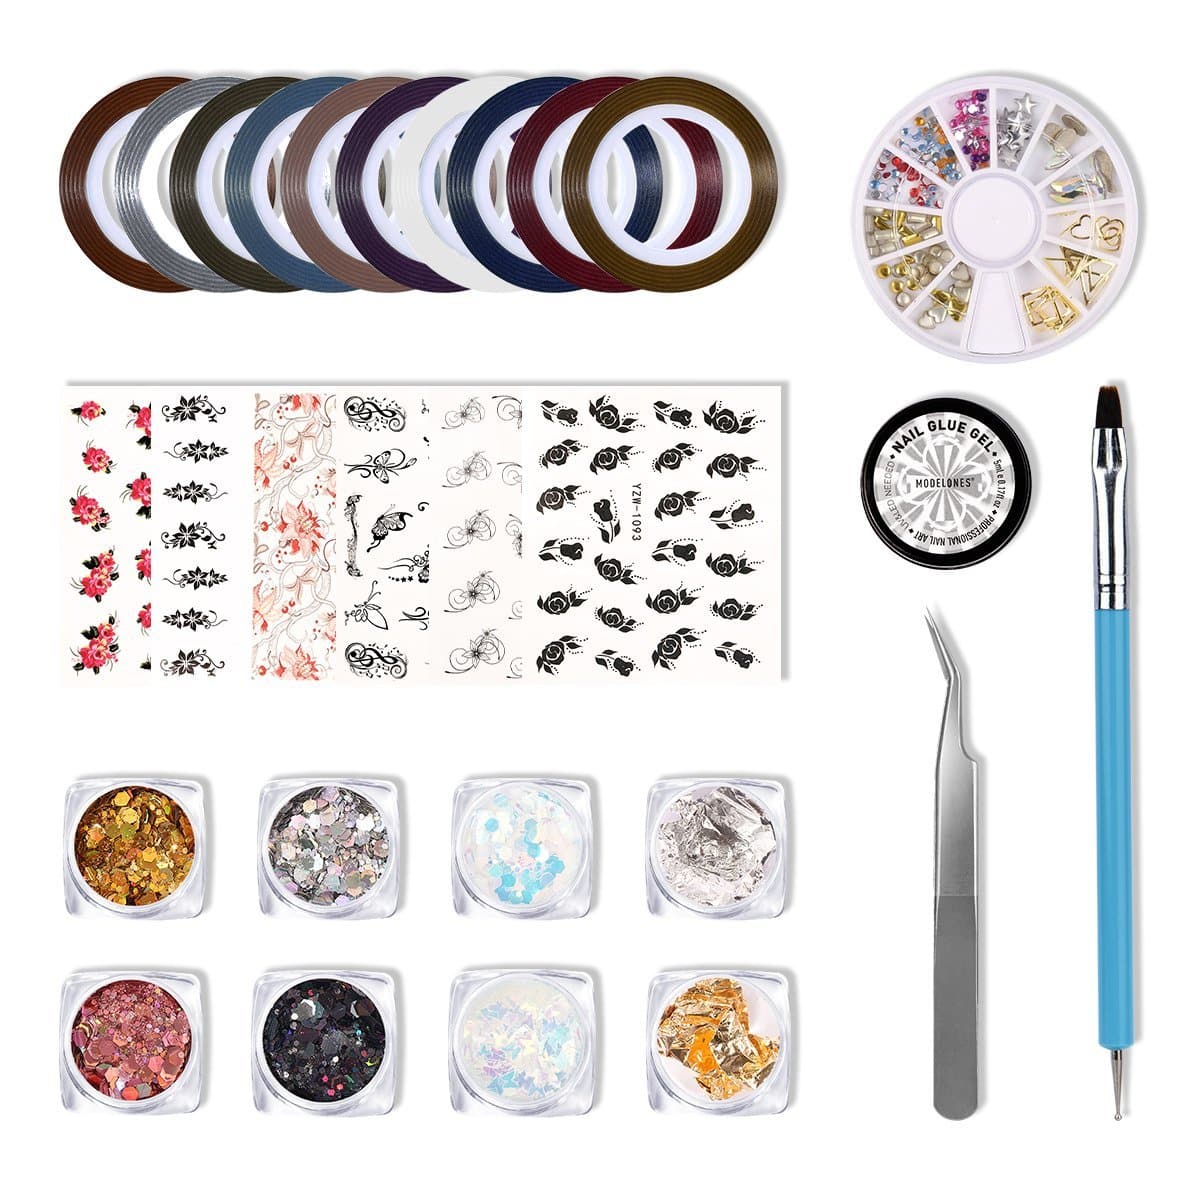 12 Best Nail Art Tools, Accessories For Your Nail Art Kit